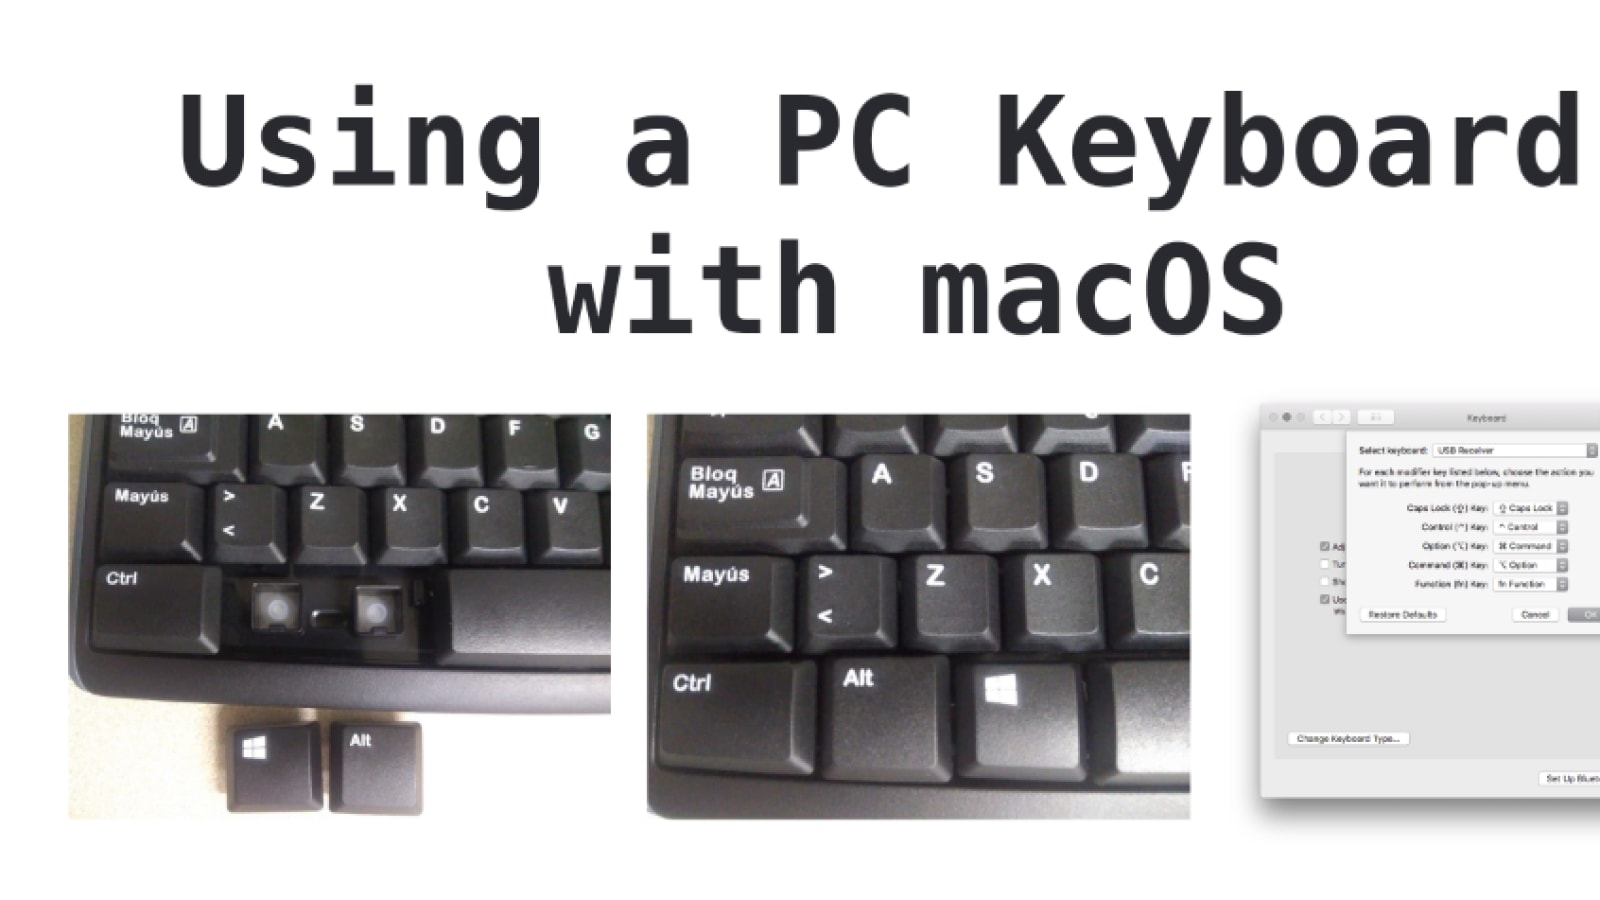 is there a windows keyboard for mac